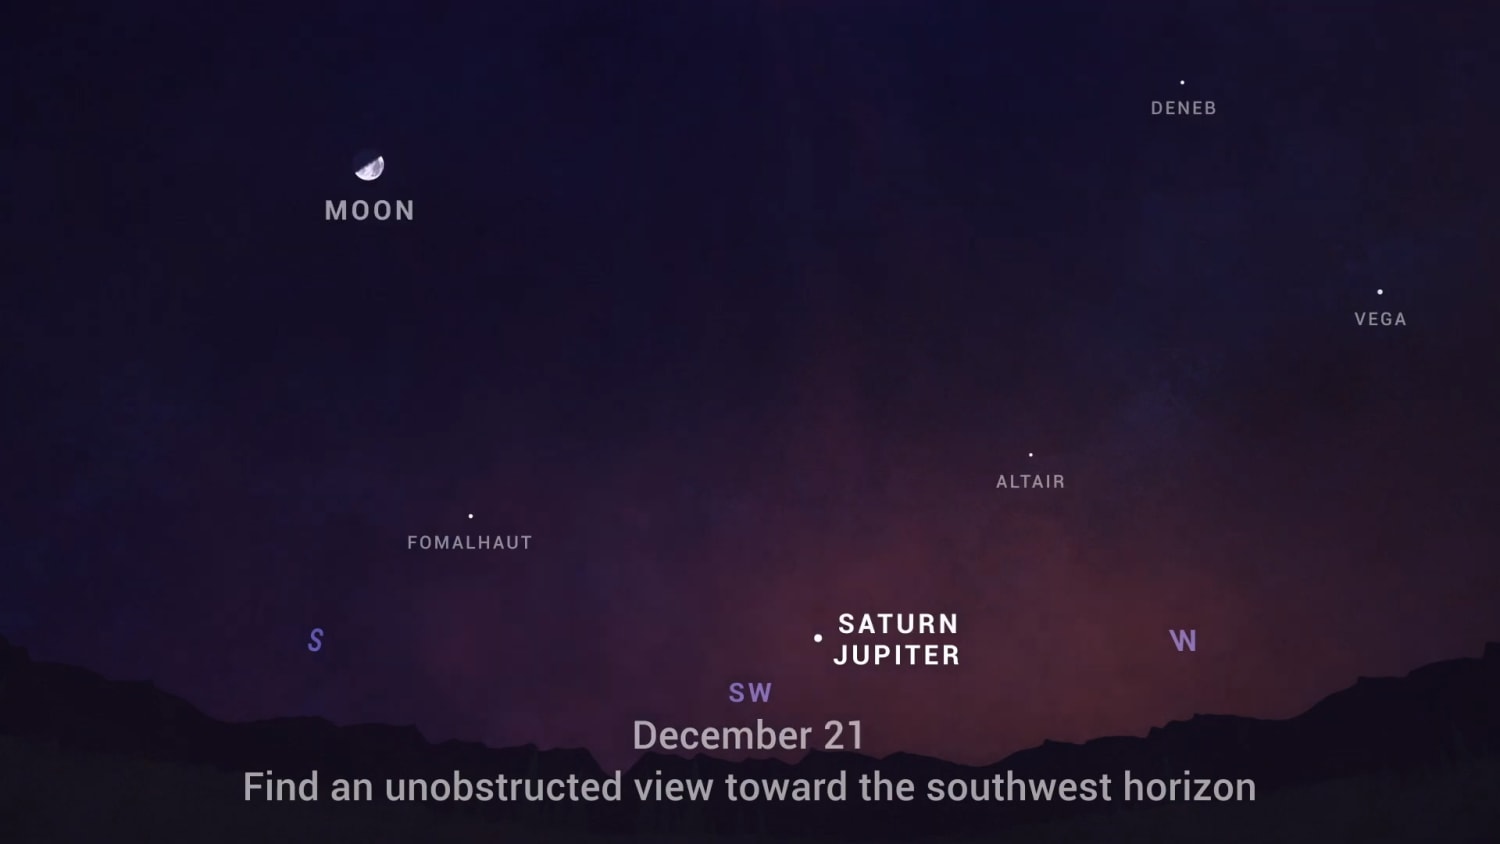 Christmas Star Will Be Closest Visible Conjunction Of Jupiter And Saturn In 800 Years